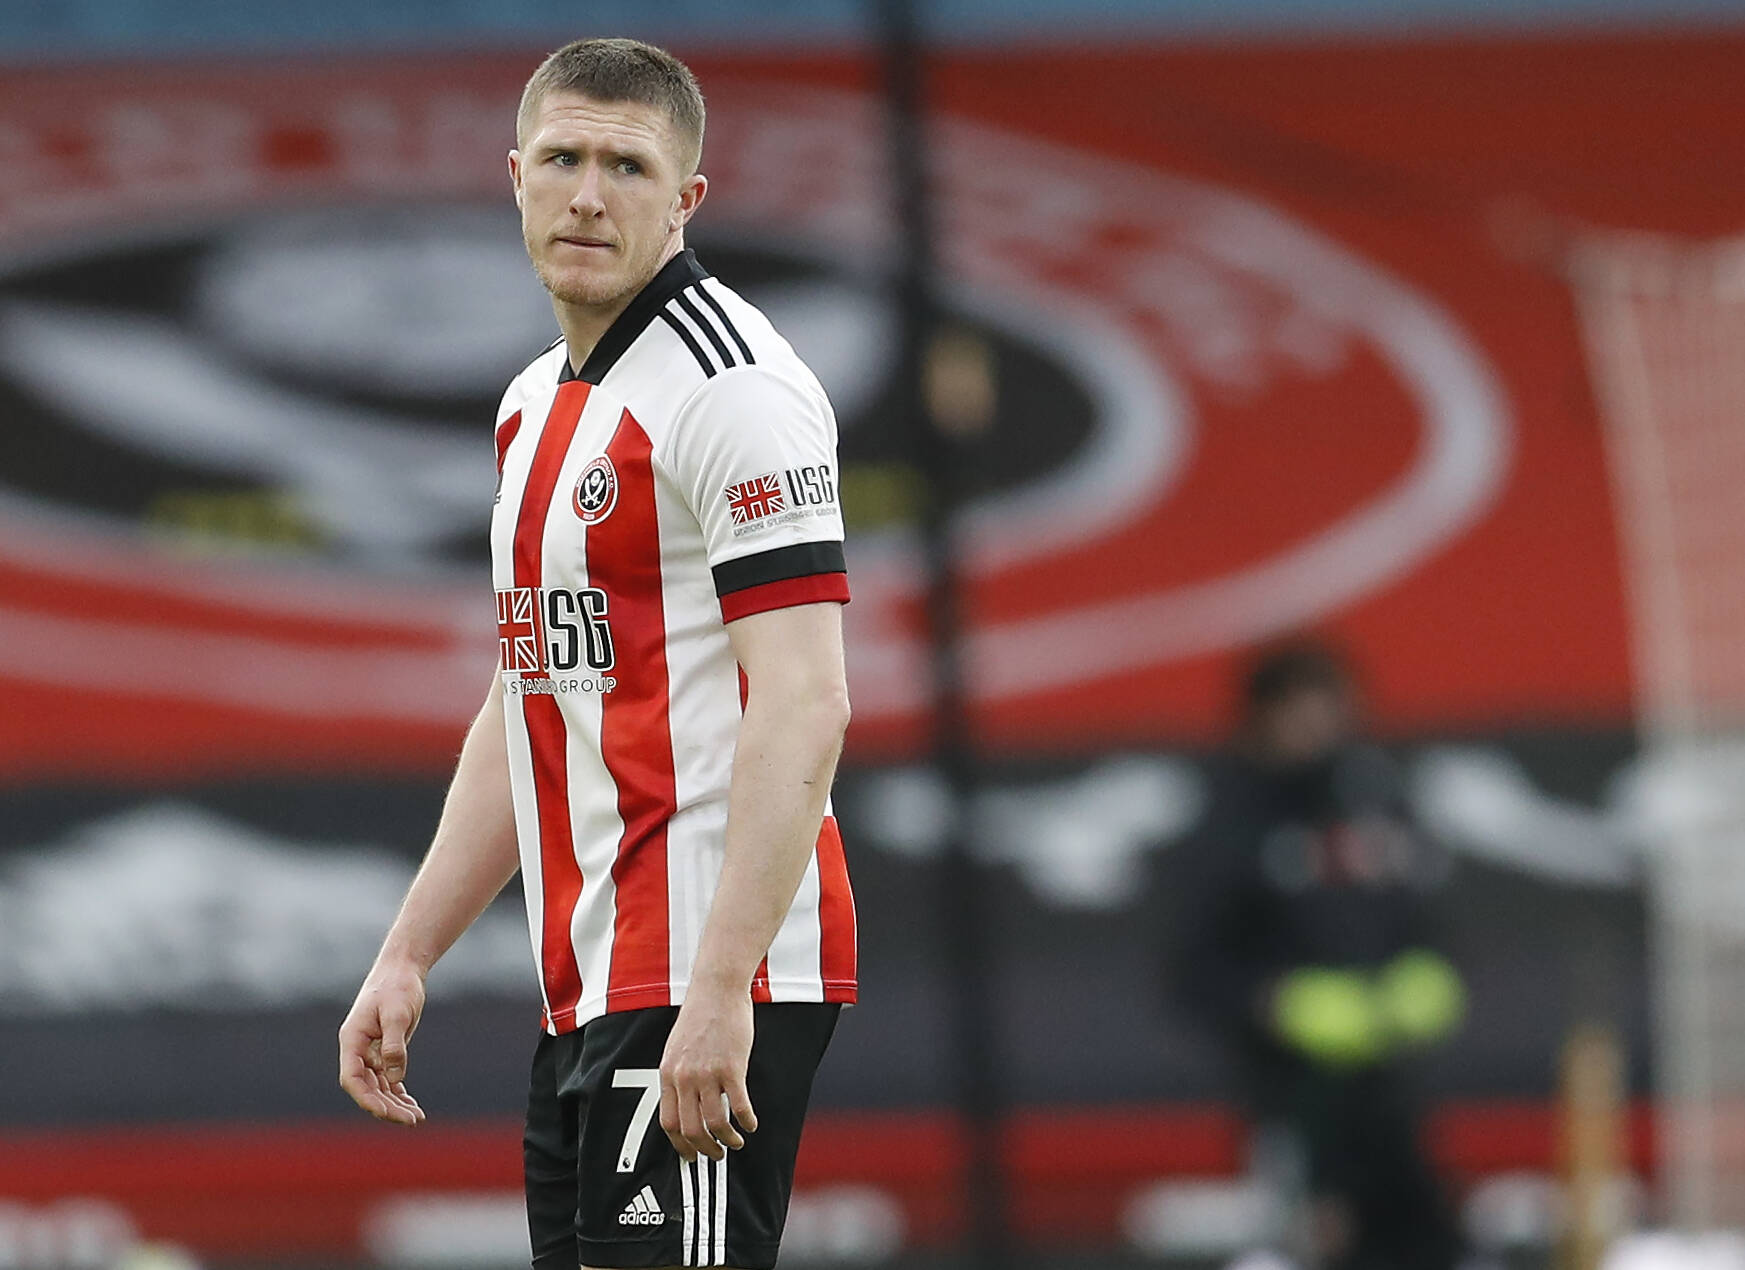 John Lundstram of Sheffield Utd leaves the pitch at the final whistle during the Premier League match at Bramall Lane, Sheffield. Picture date: 6th March 2021. Picture credit should read: Darren Staples/Sportimage PUBLICATIONxNOTxINxUK SPI-0938-0057